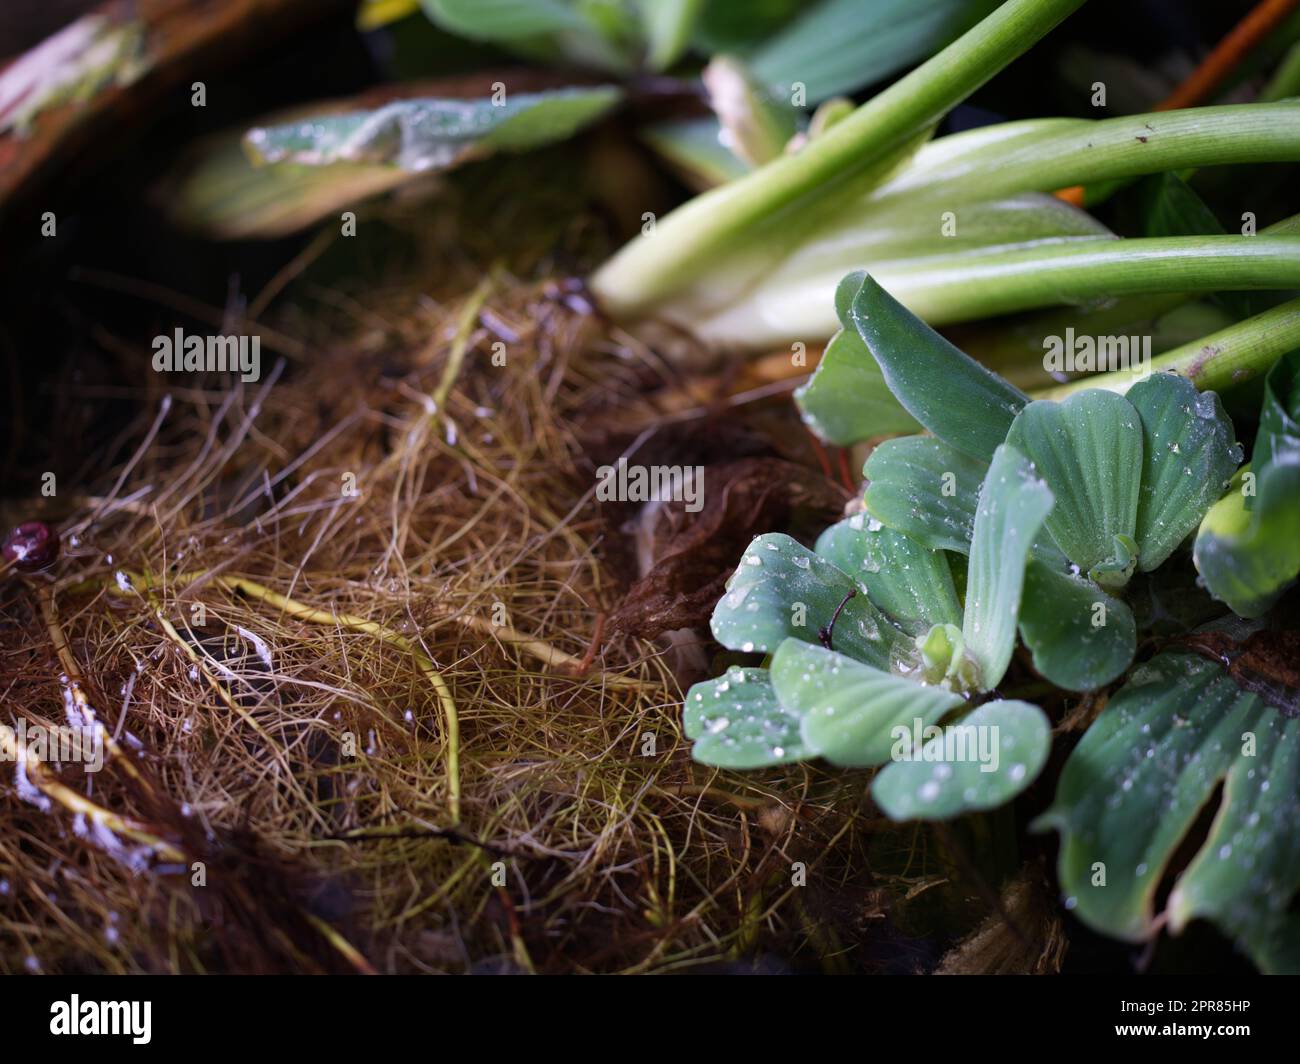 Water lettuce or Pistia stratiotes Linnaeus on the water and water drop Stock Photo